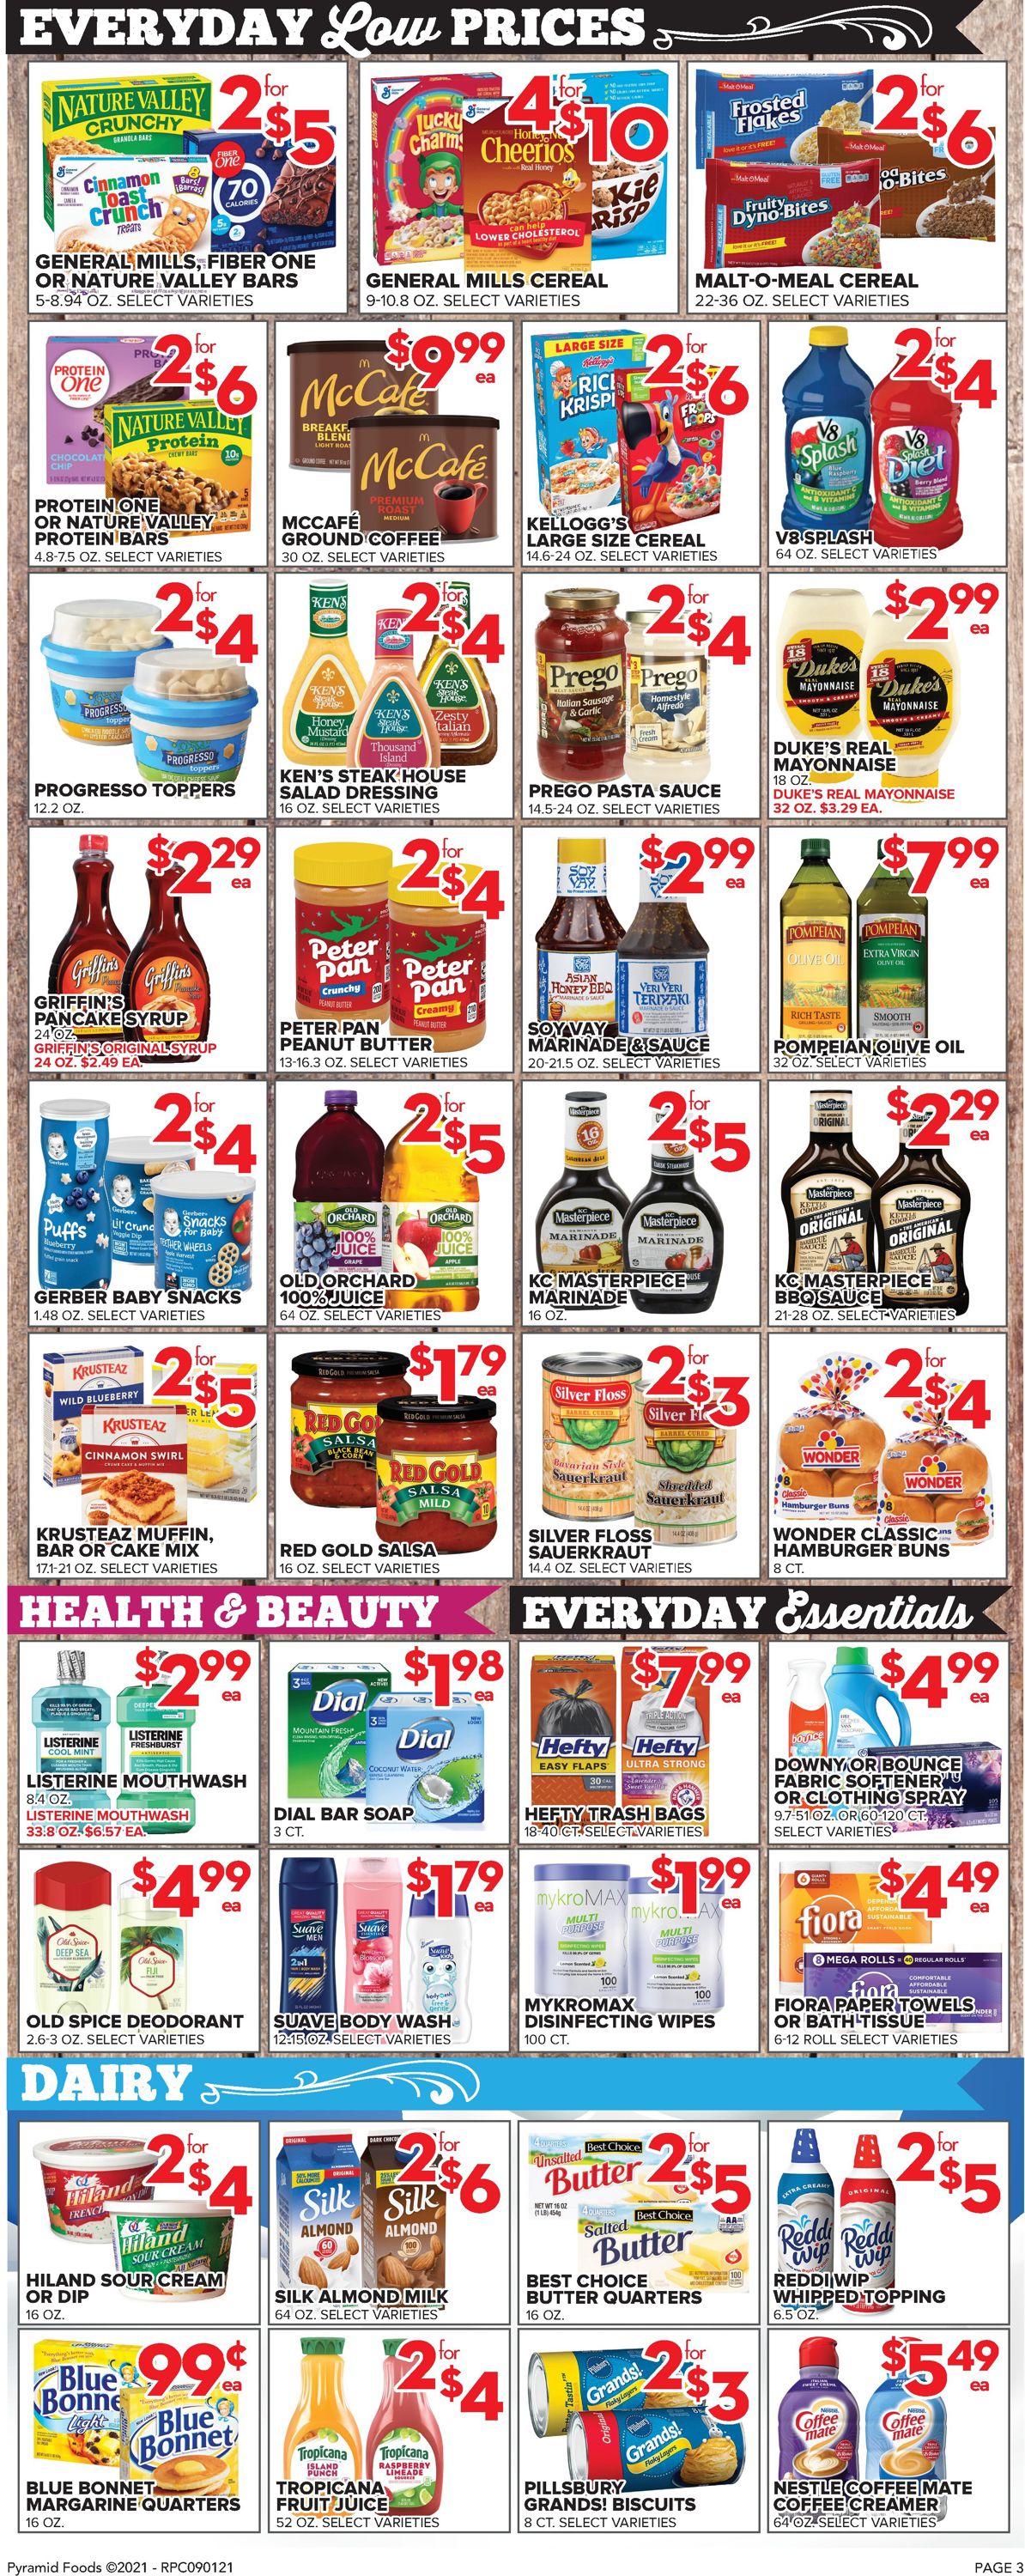 Price Cutter Weekly Ad Circular - valid 09/01-09/07/2021 (Page 3)